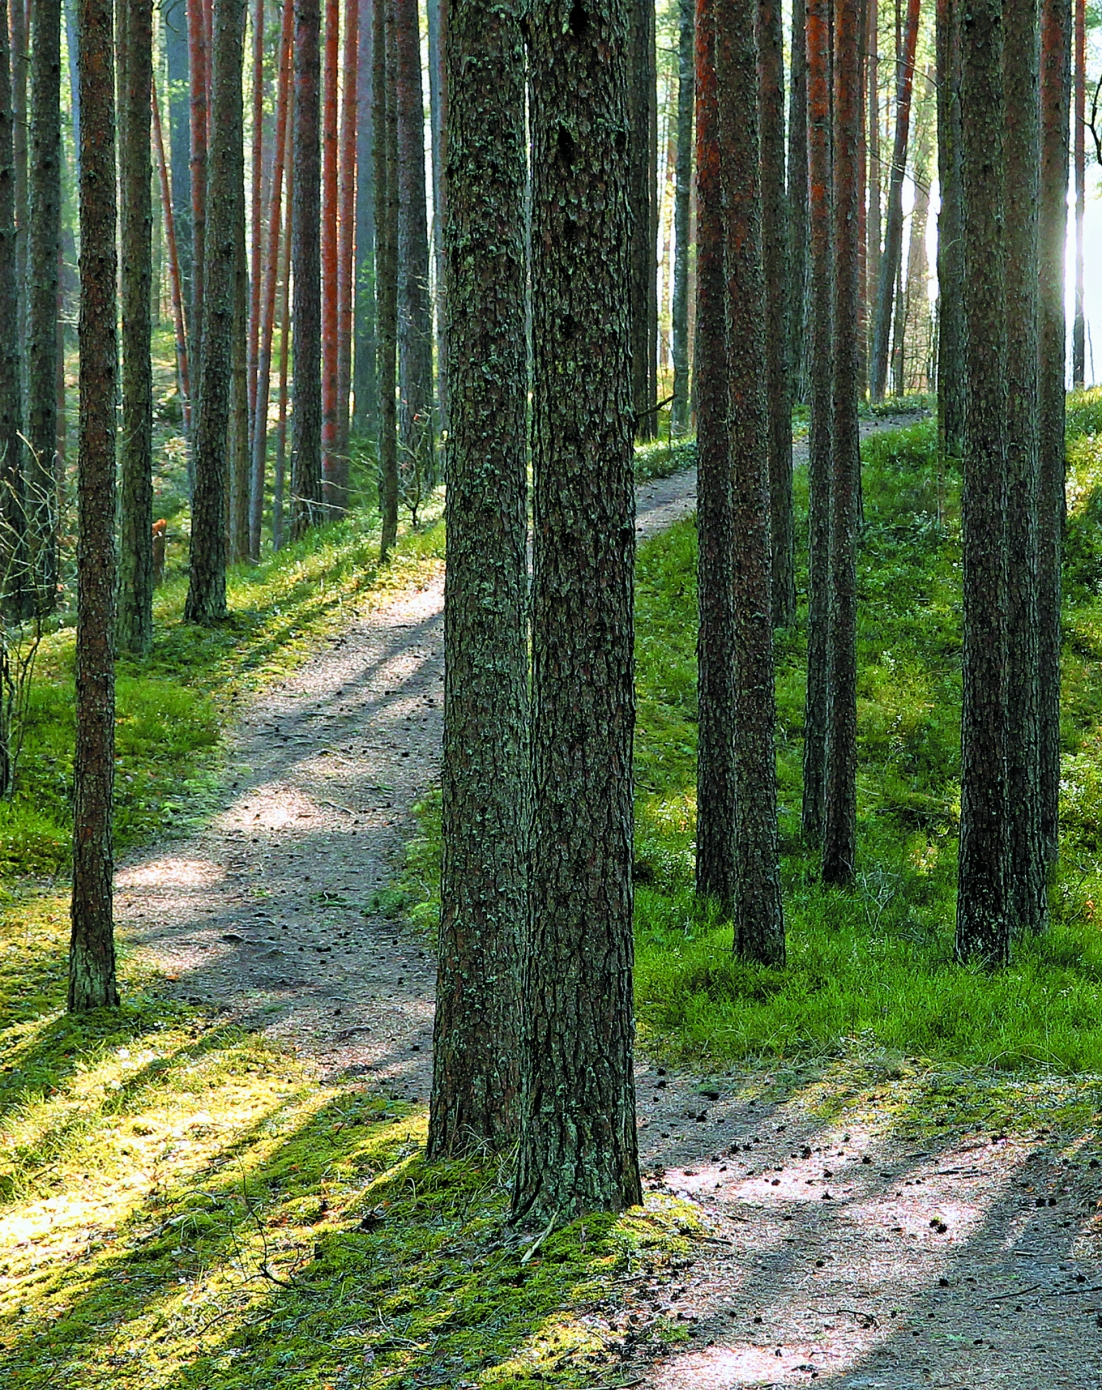 Sandy path winding through a pine forest